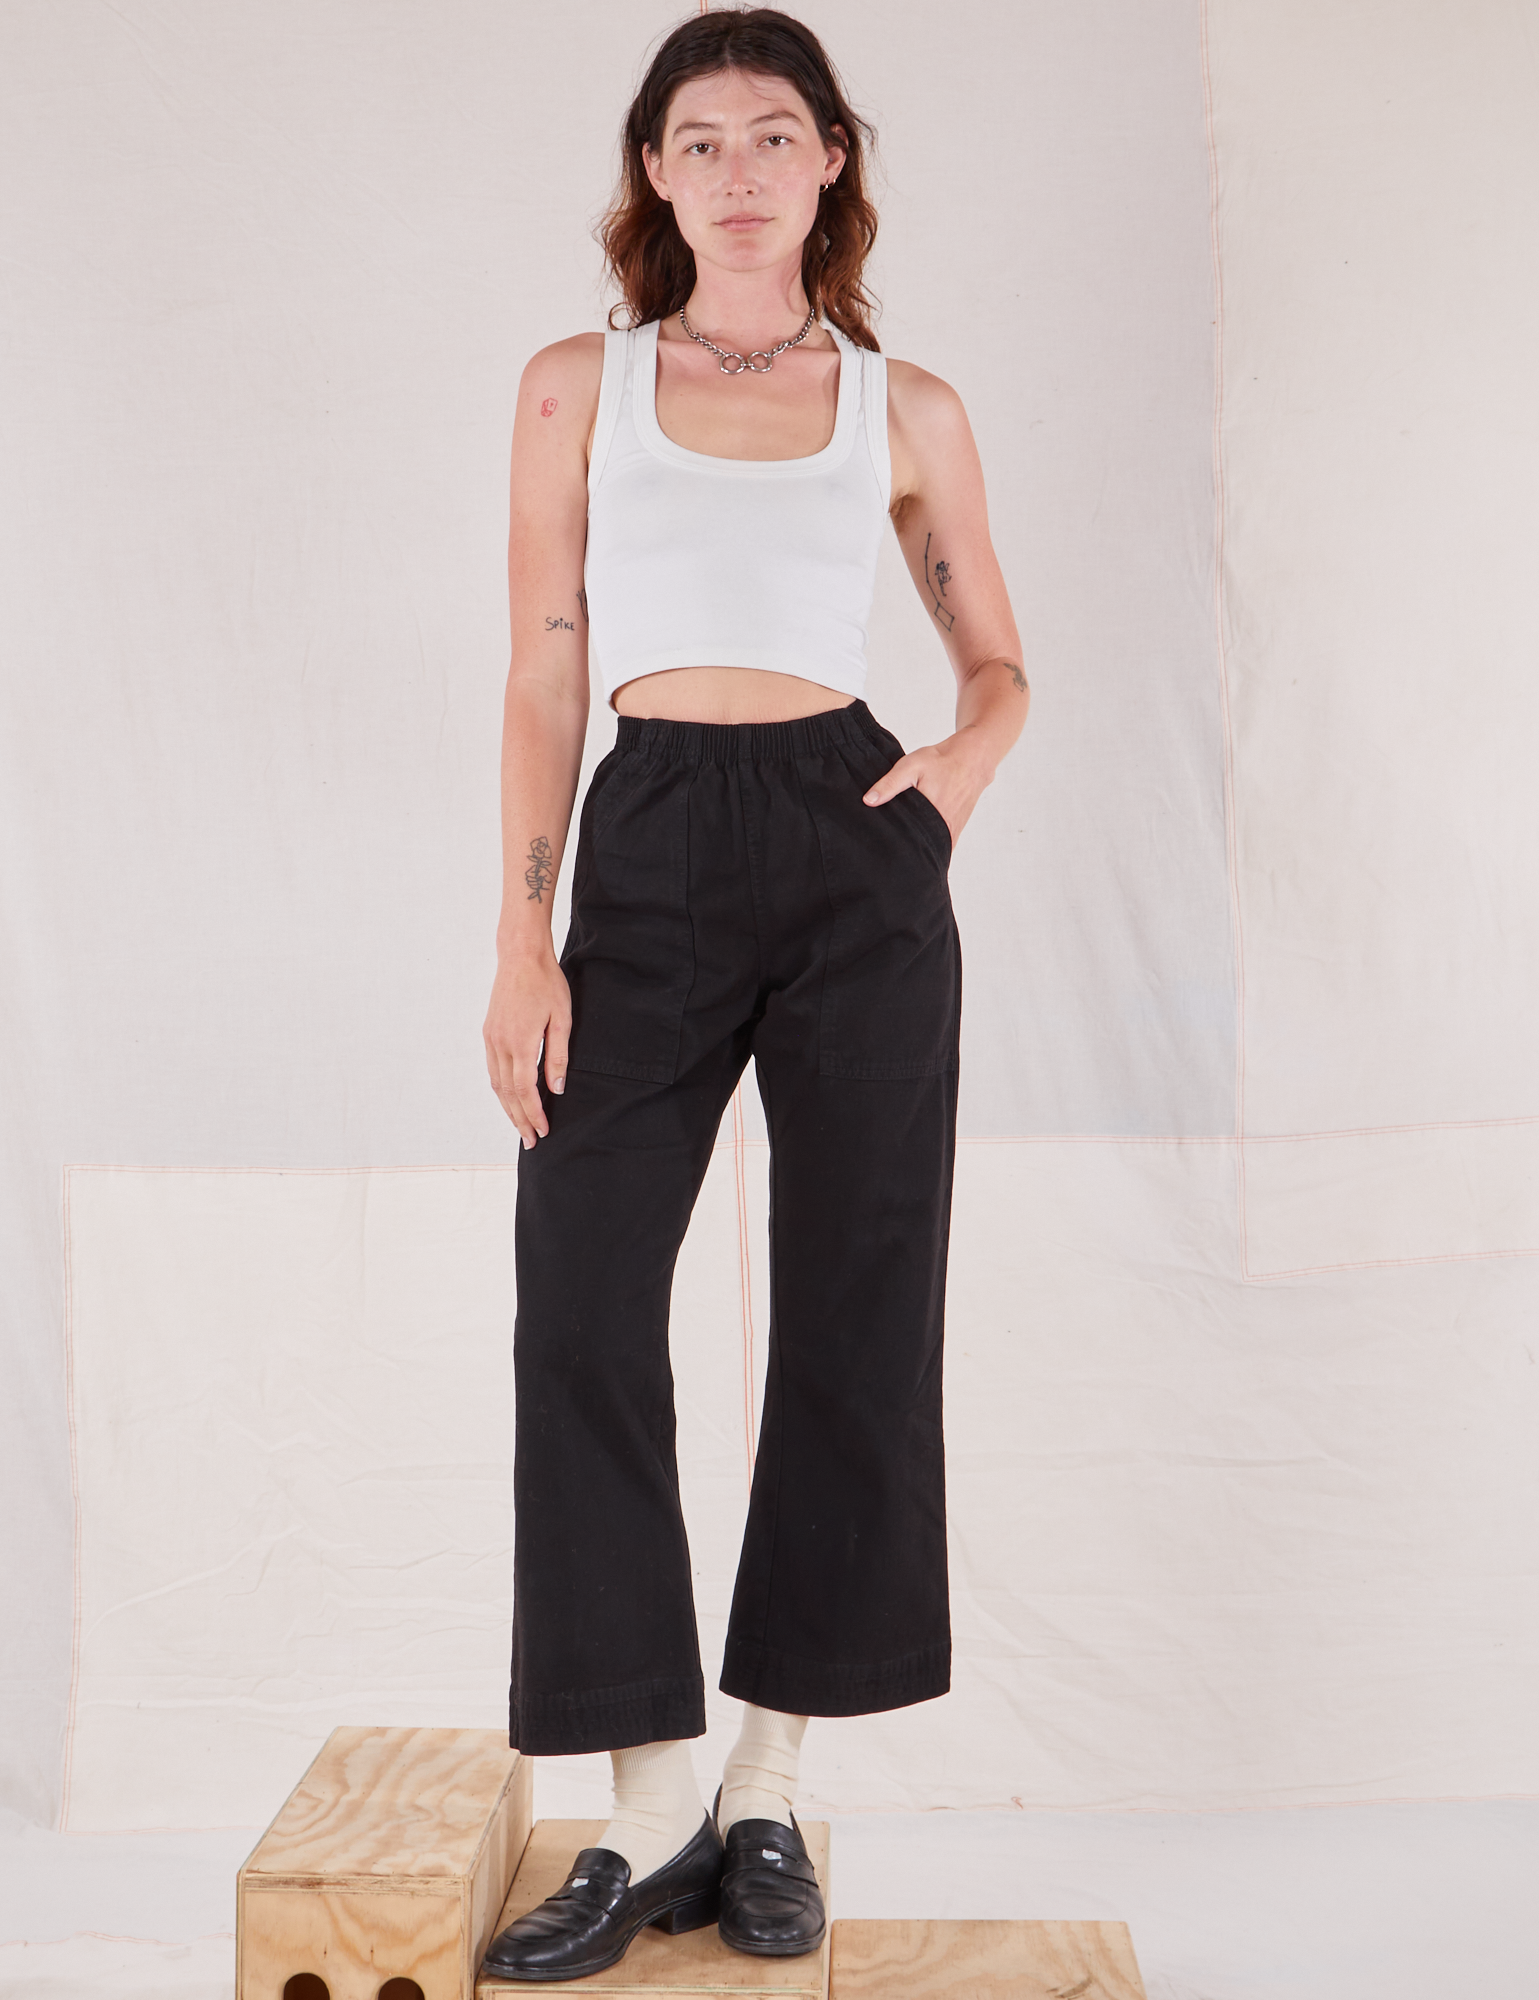 Alex is 5'8" and wearing P Action Pants in Basic Black paired with Cropped Tank in vintage tee off-white